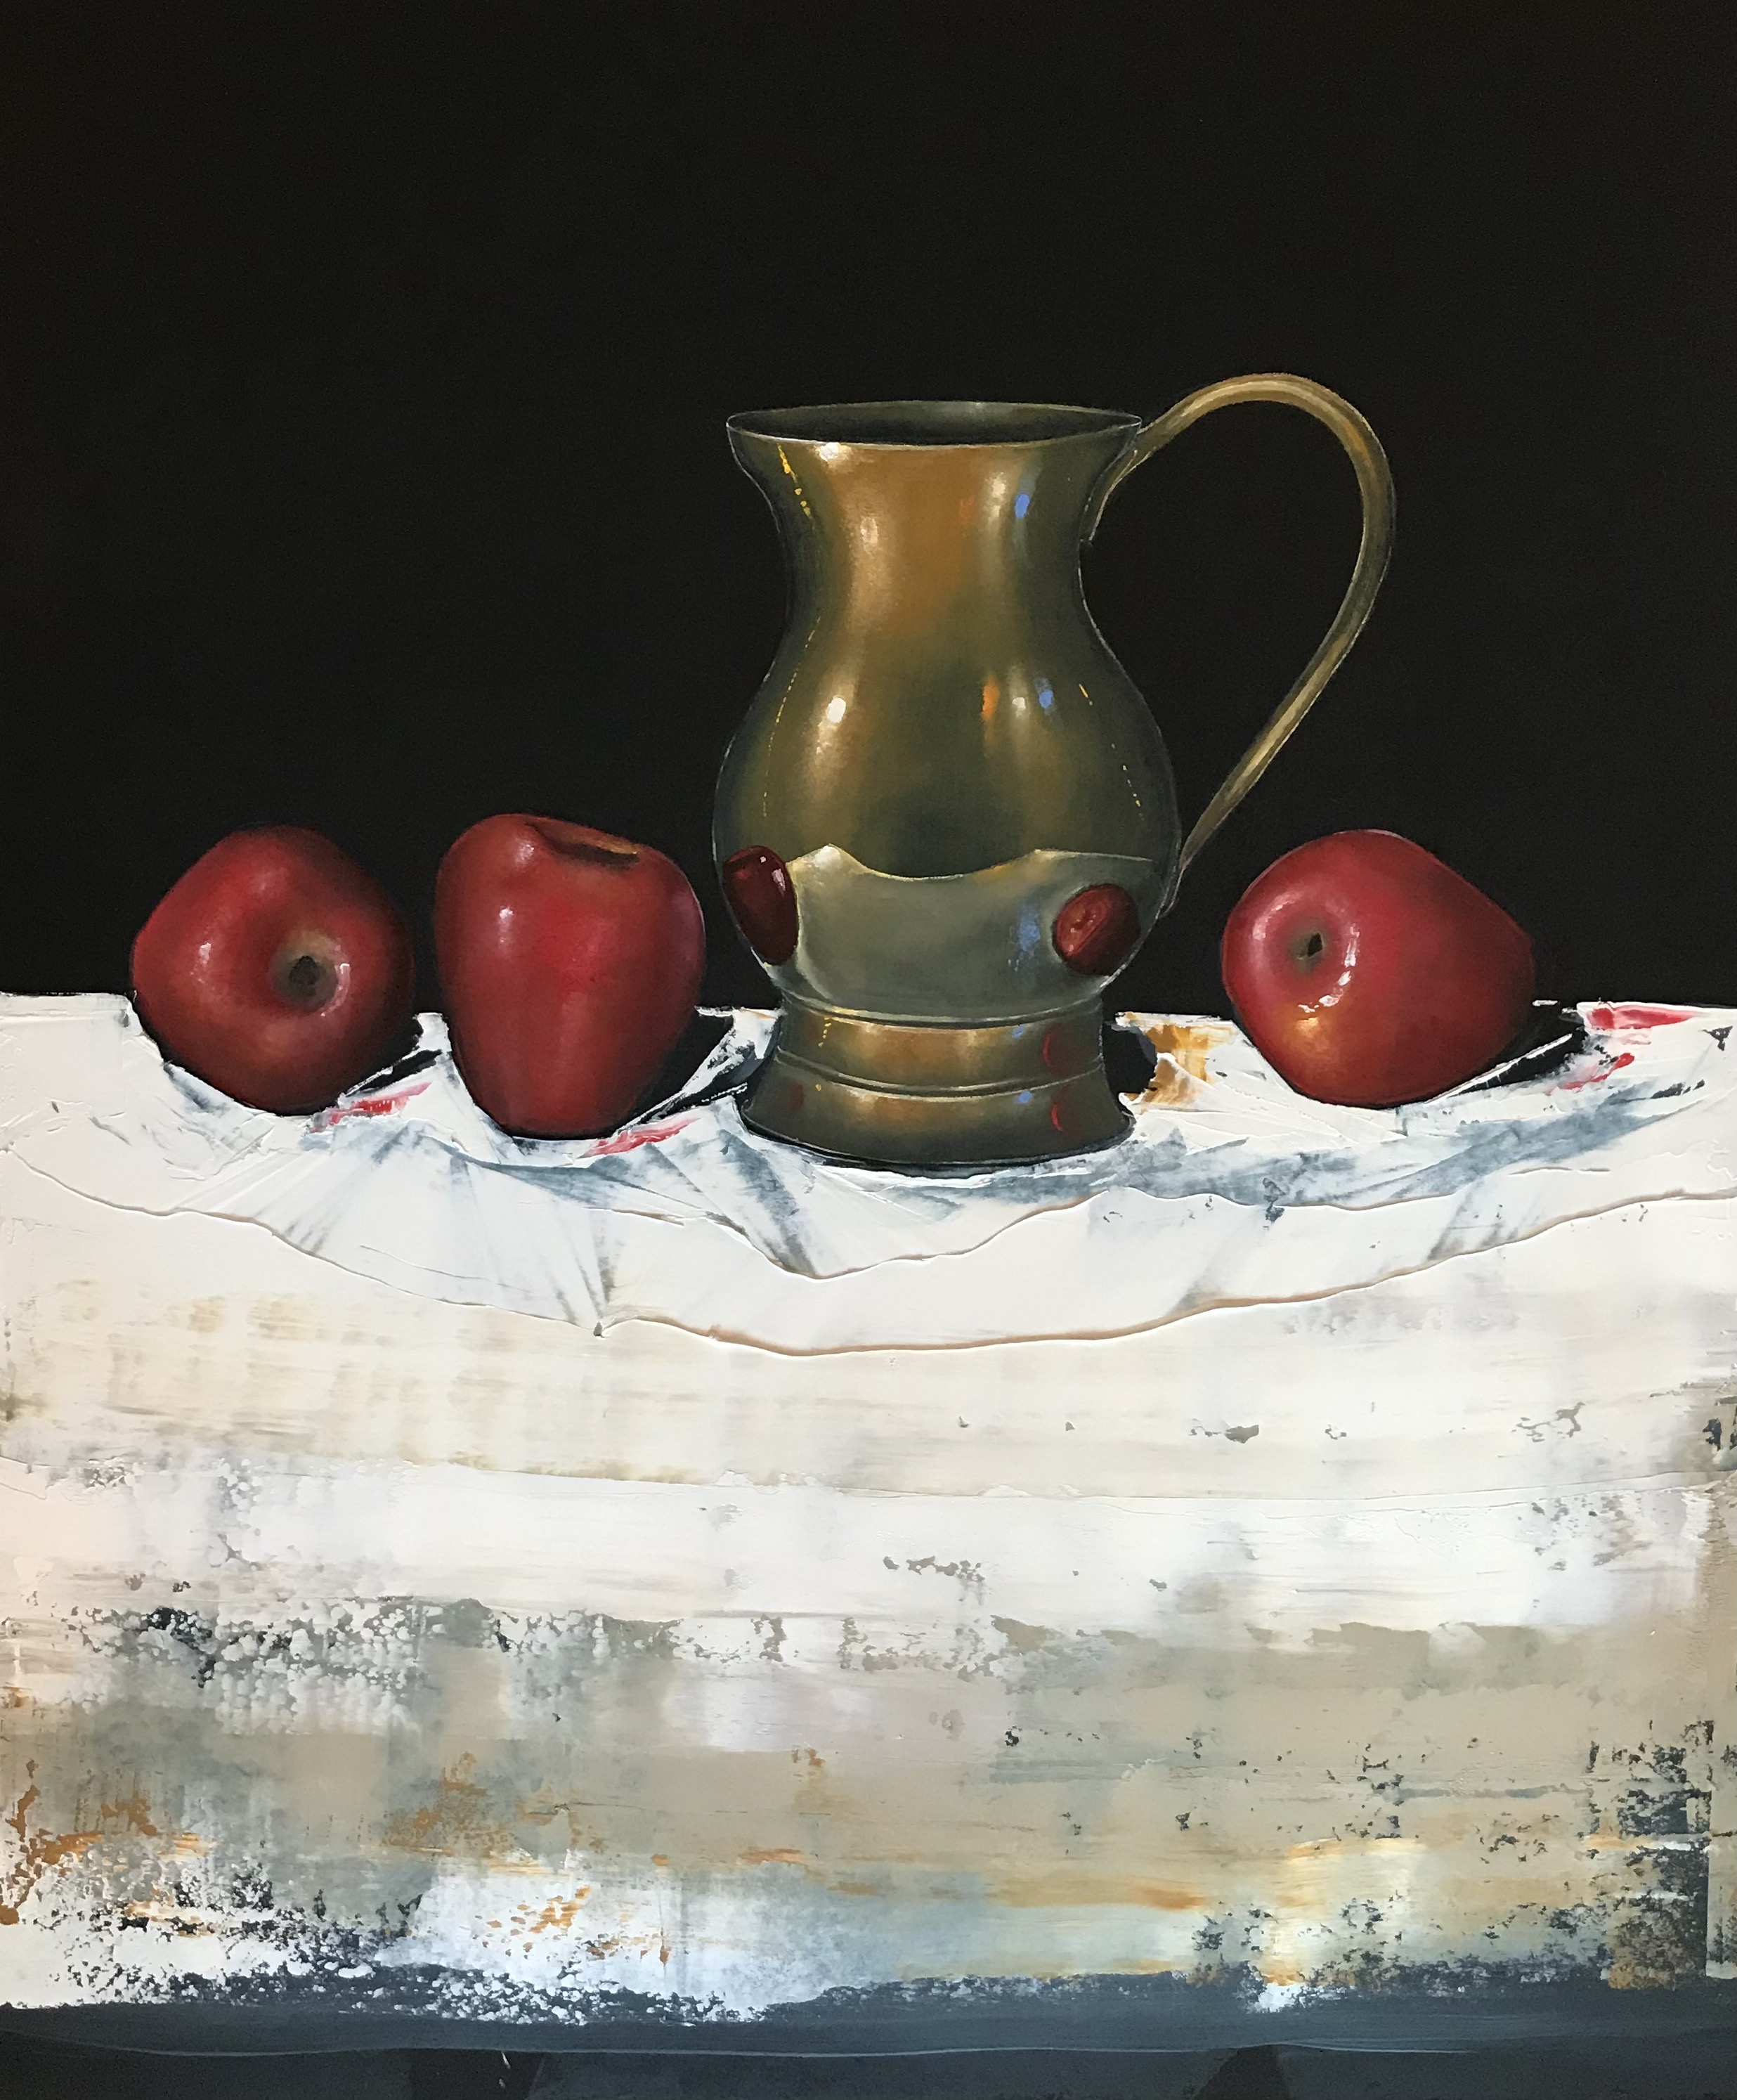 'Brass Jug and Red Apples', oil on canvas, 51cm x 61cm, £625